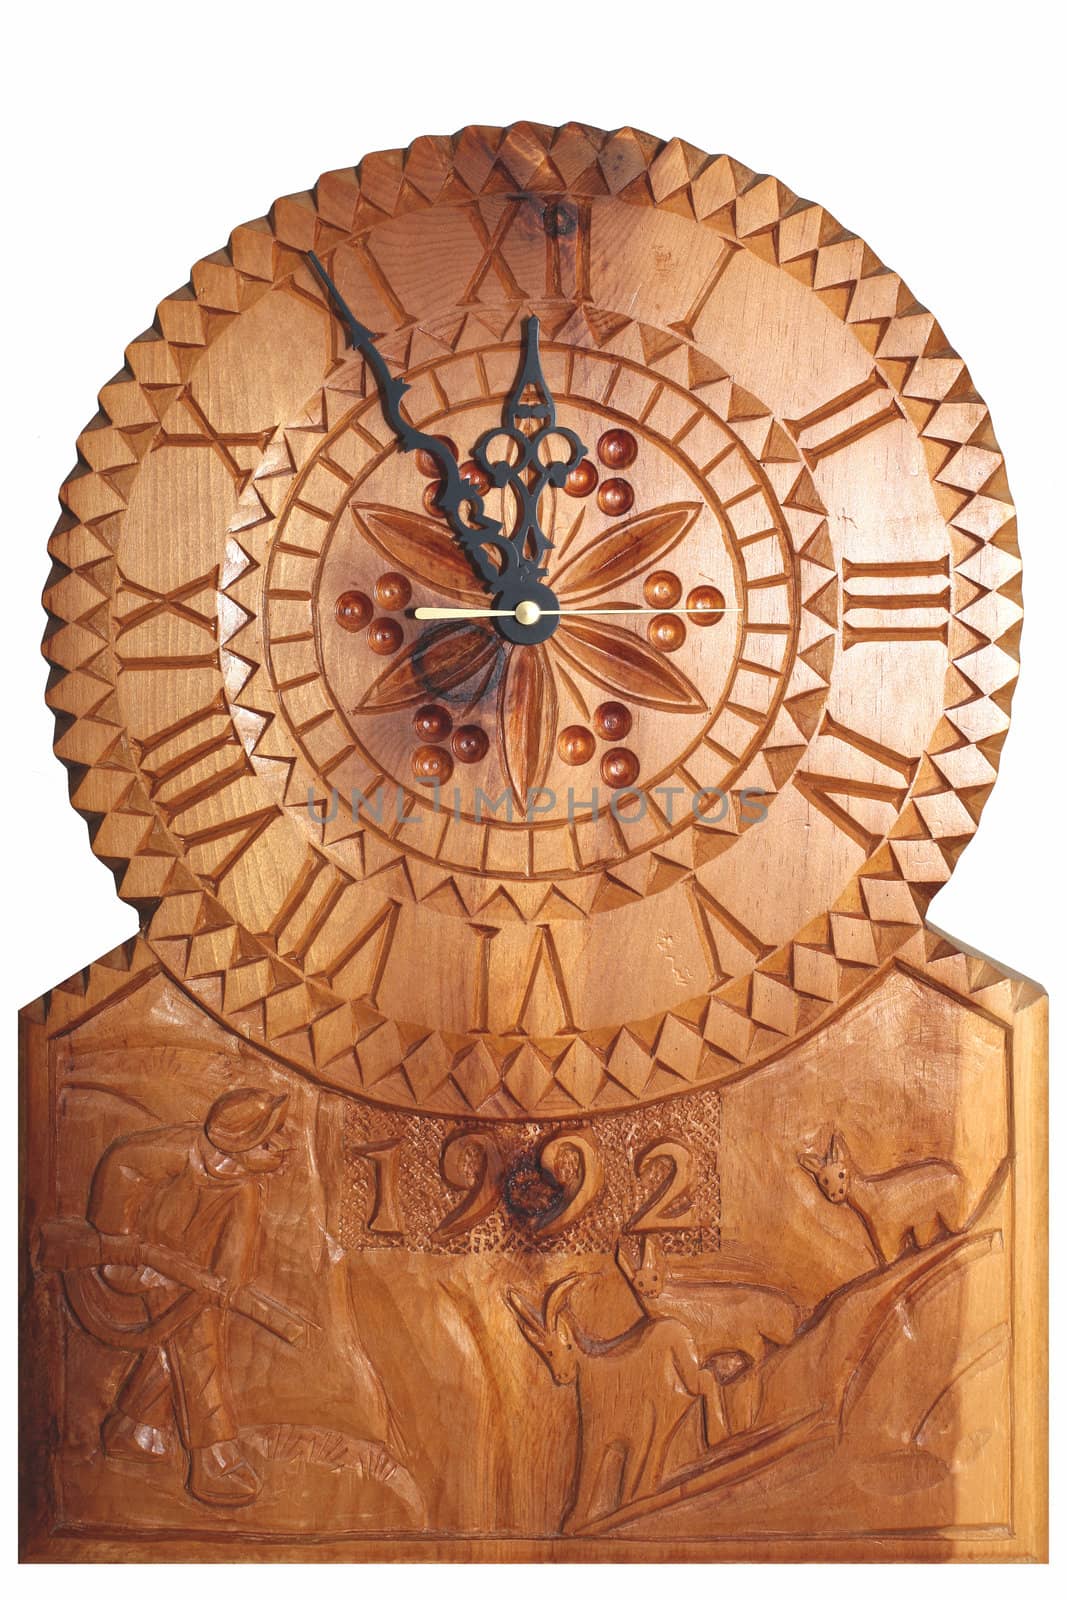 Clock carved on wood by monner